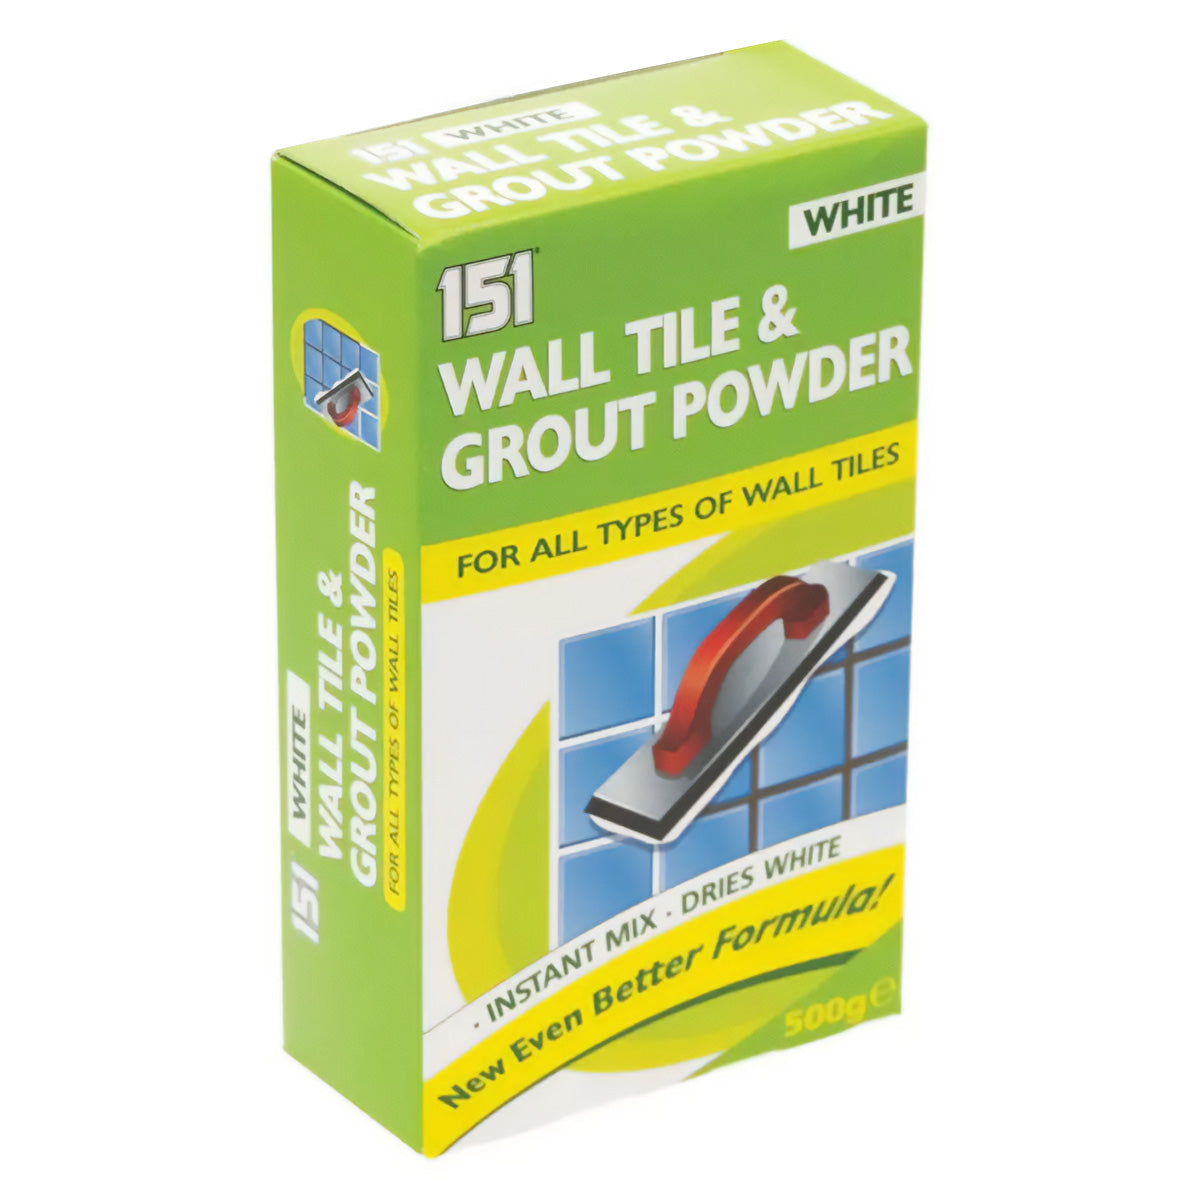 151 - Wall Tile & Grout Powder - 500g - Continental Food Store